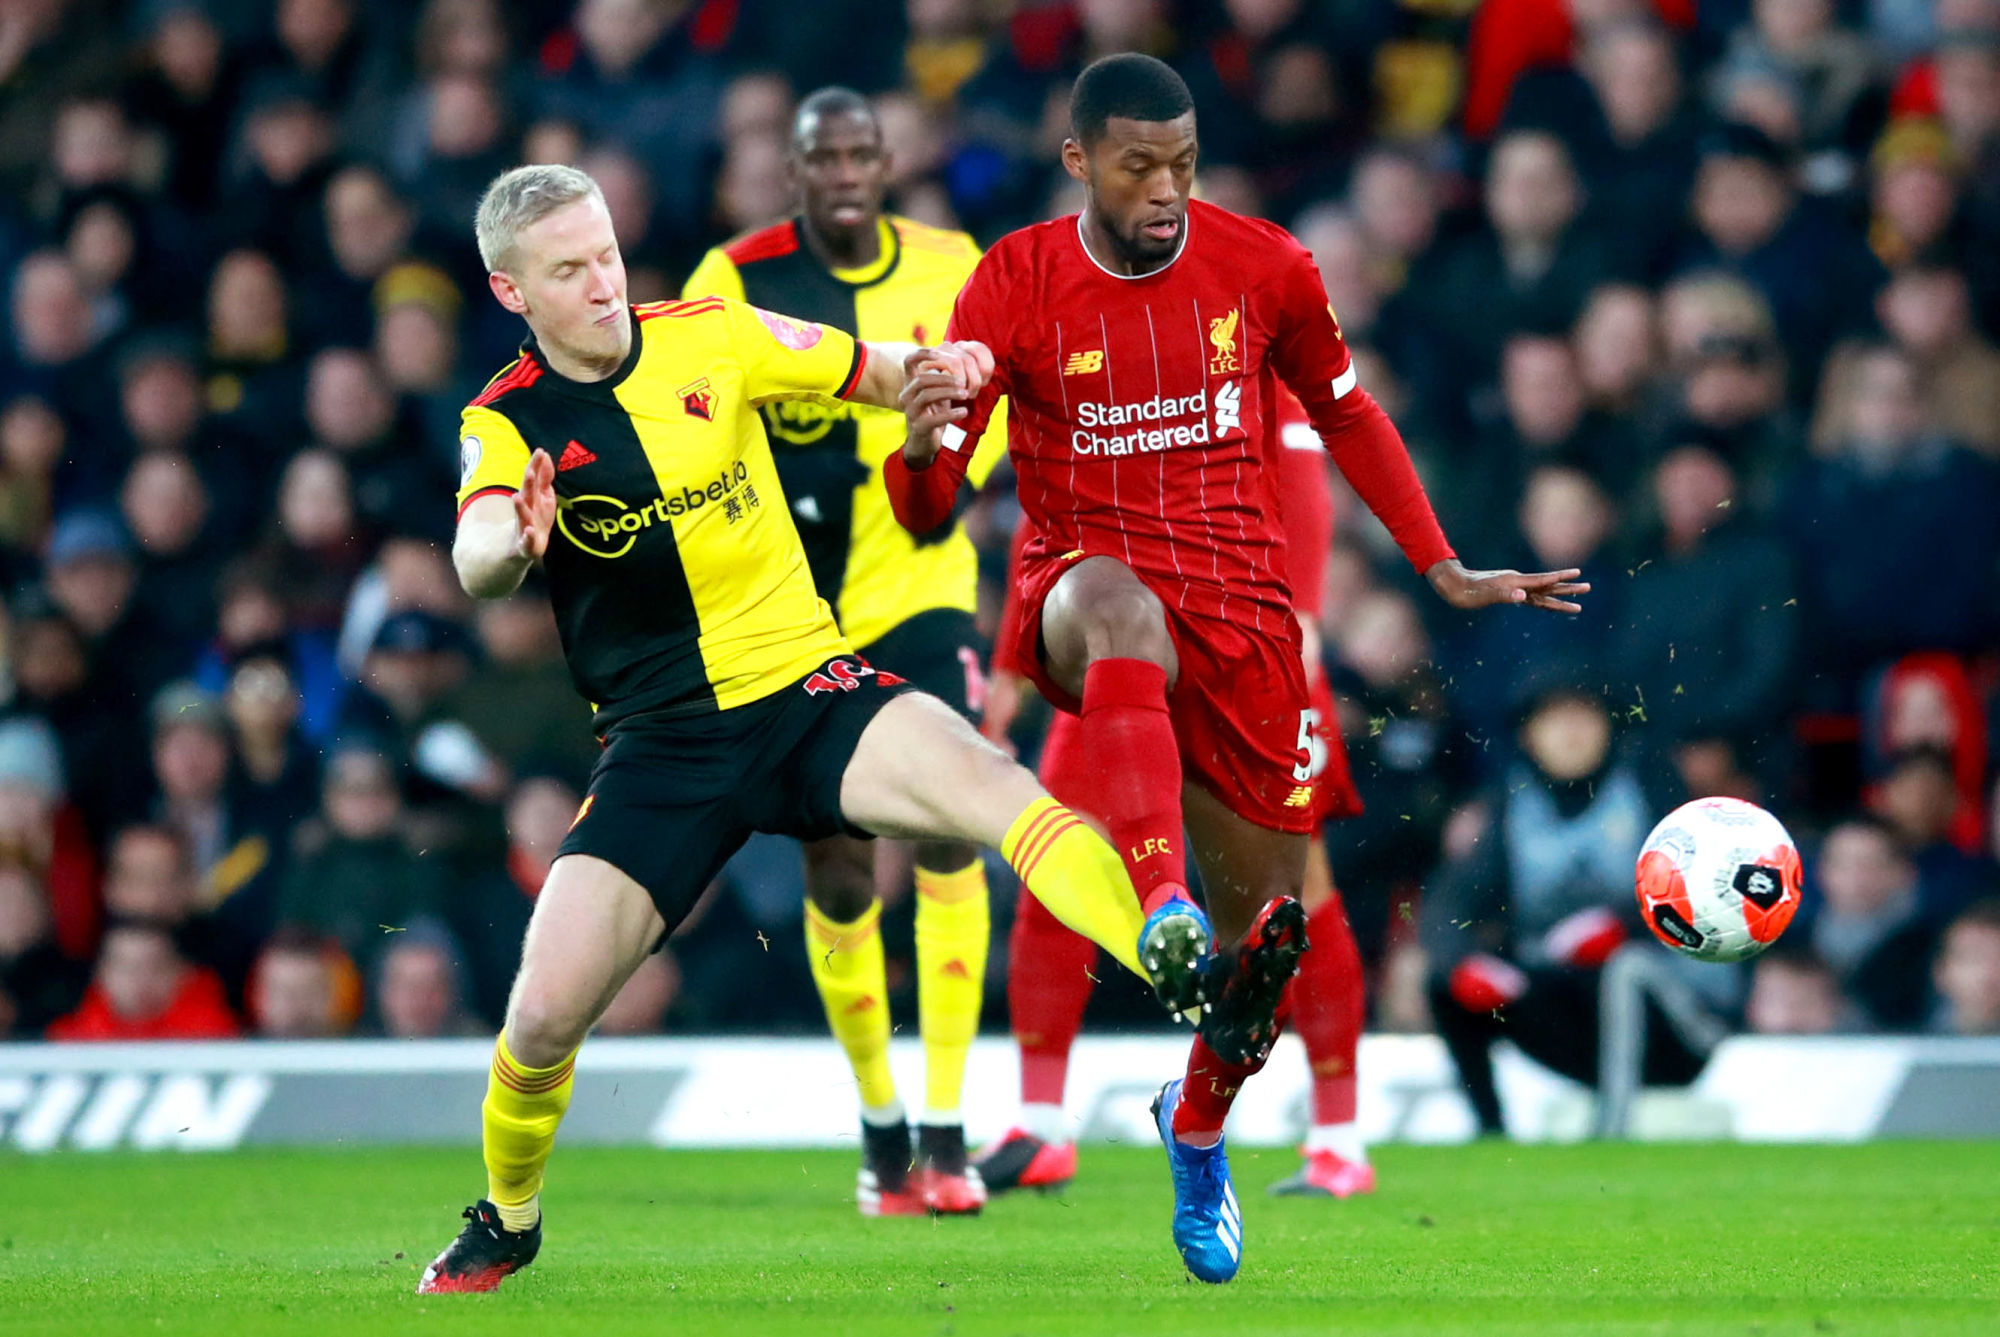 Liverpool's Georginio Wijnaldum (right) and Watford's Will Hughes battle for the ball during the Premier League match at Vicarage Road, Watford. 
Photo by Icon Sport - Vicarage Road - Watford (Angleterre)